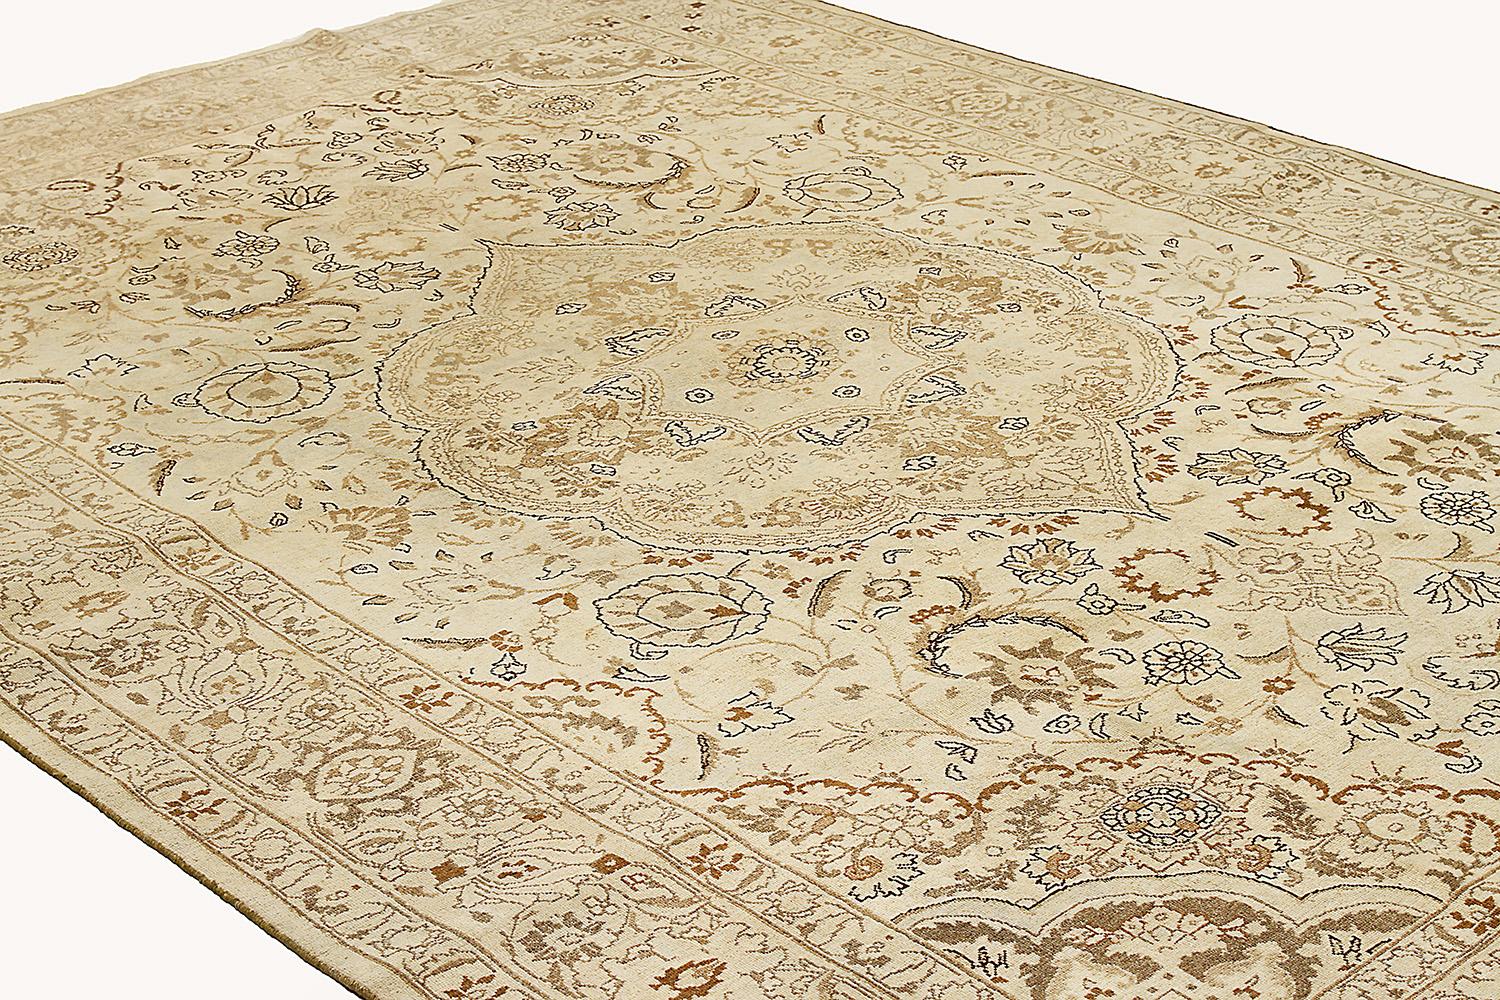 Hand-Woven Antique Persian Tabriz Rug with Black and Brown Floral Motifs on Ivory Field For Sale